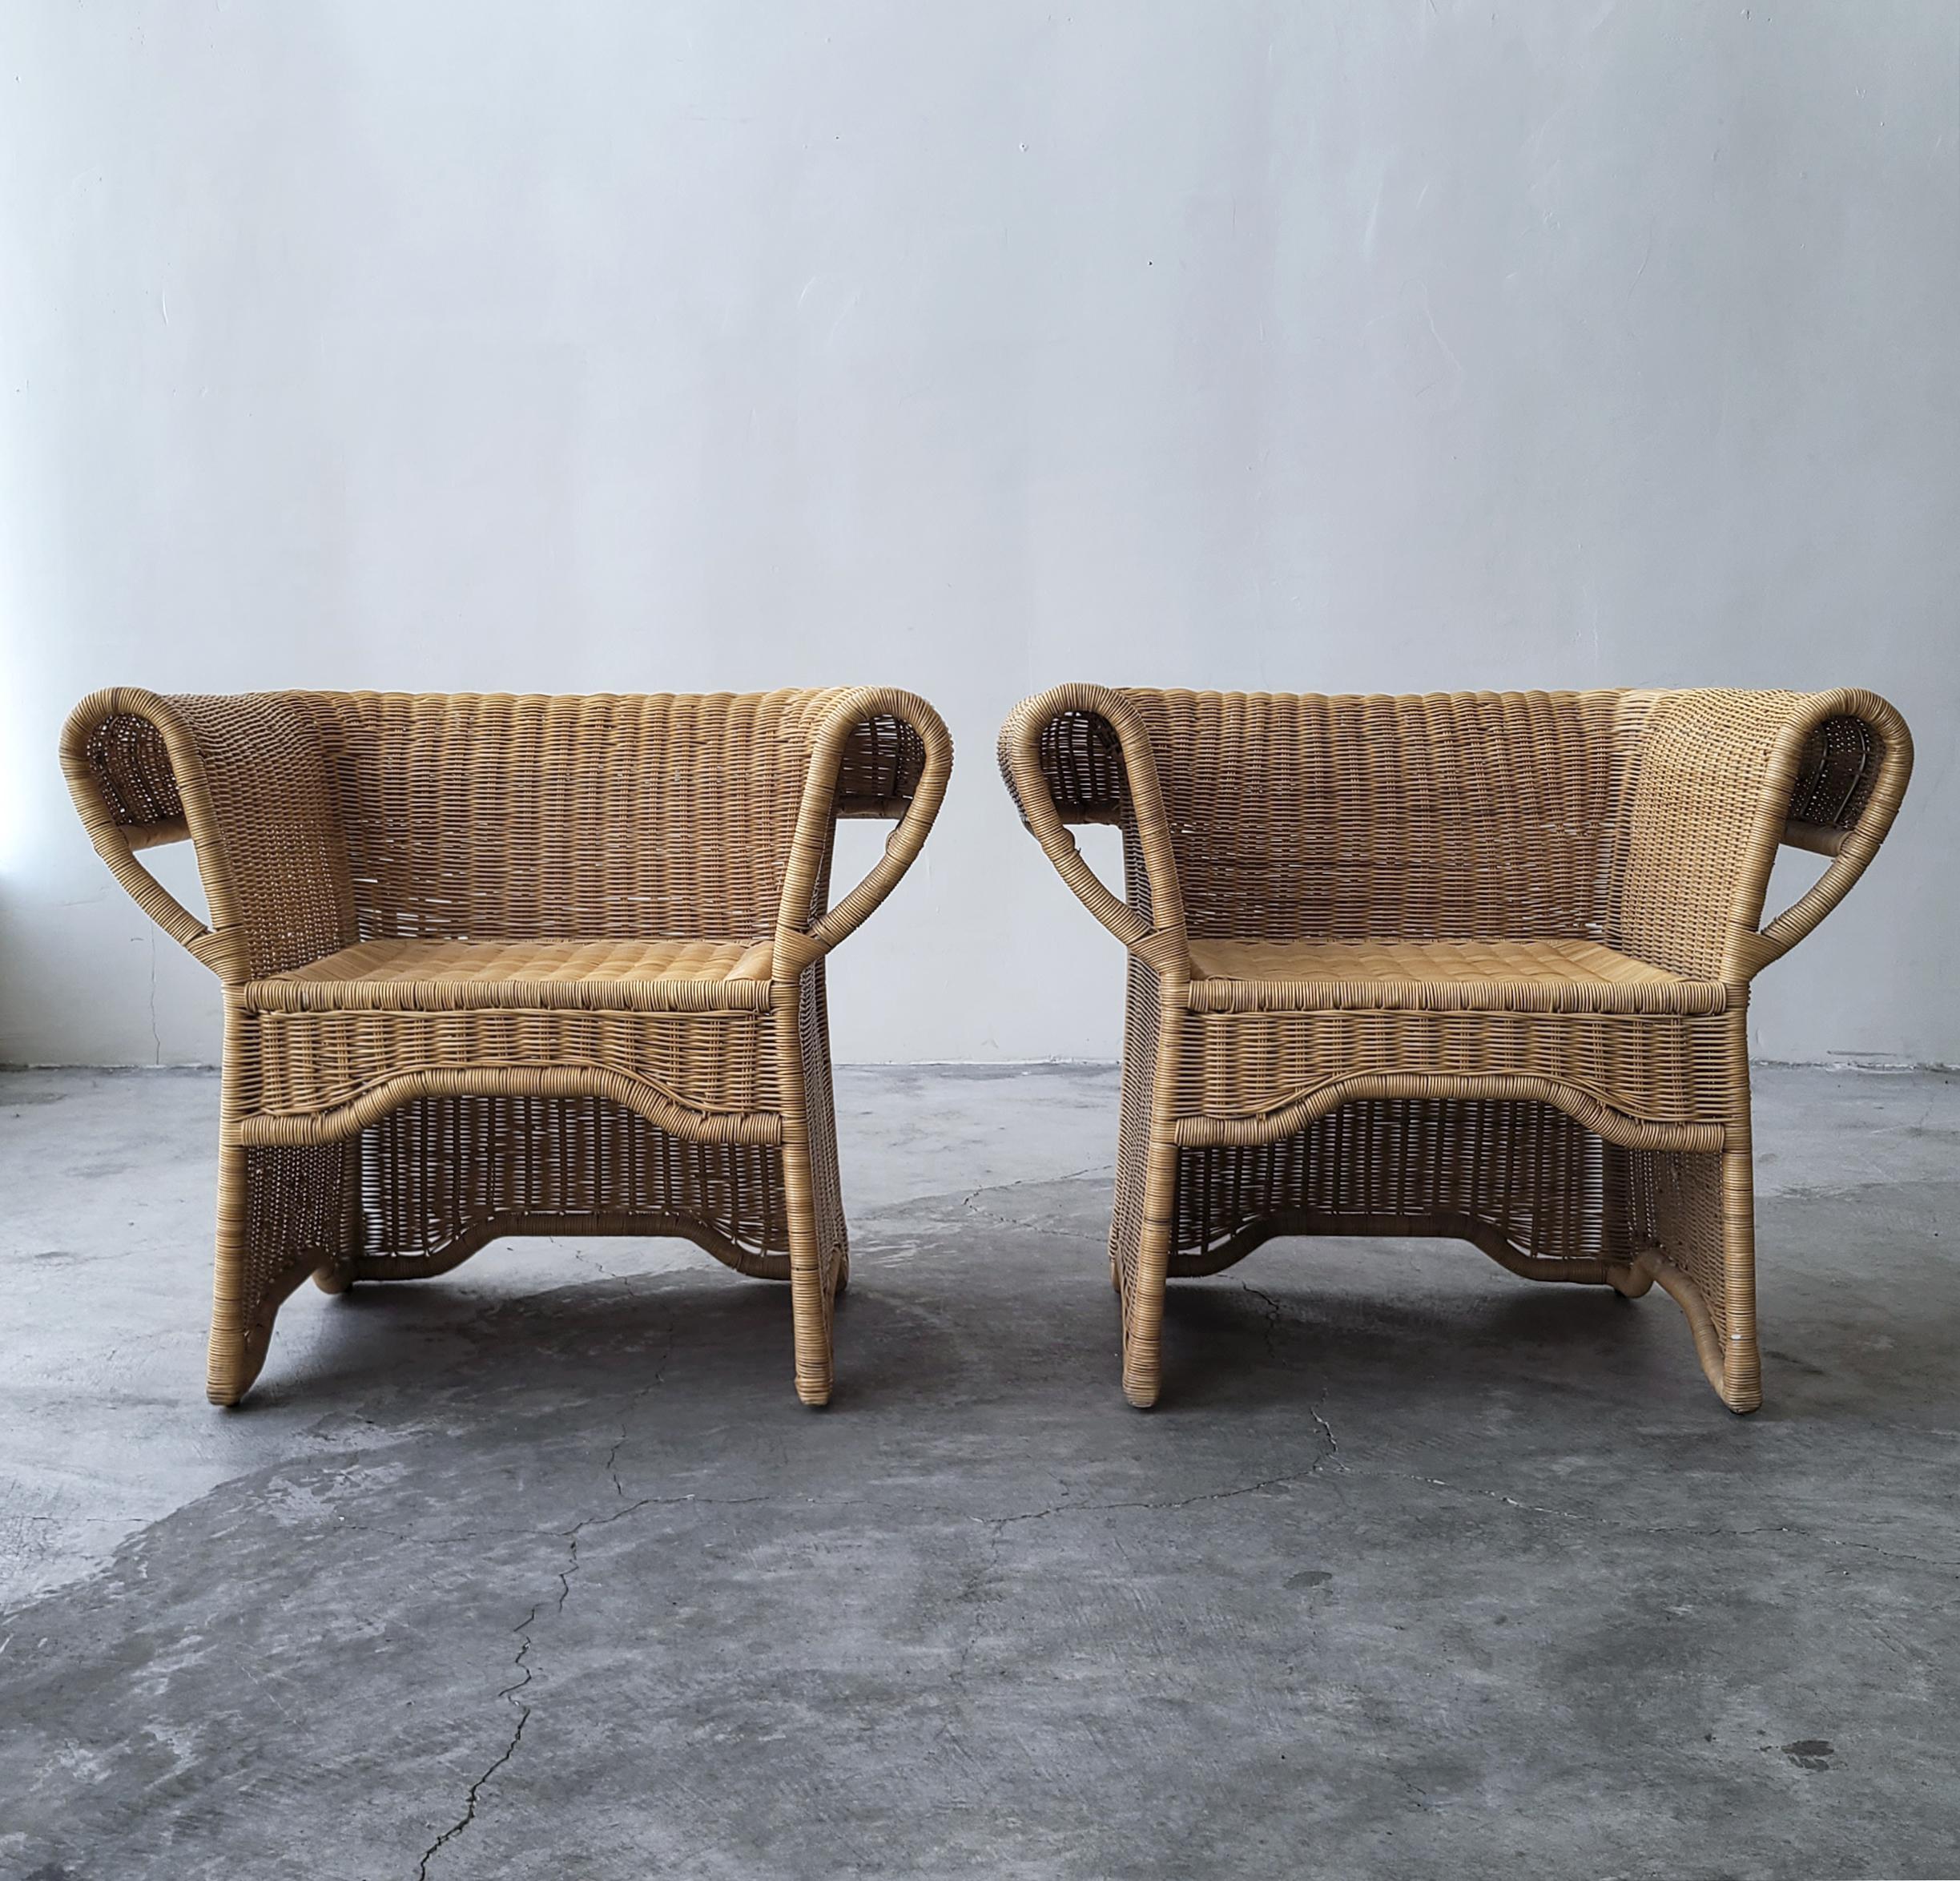 Gorgeous pair of Arurog wicker chairs. This pair has the most beautiful details with its looped arms. Metal framed wicker furniture is a rarity, and built to last. The set is in incredible condition with next to no signs of use. 

Listing is for 2